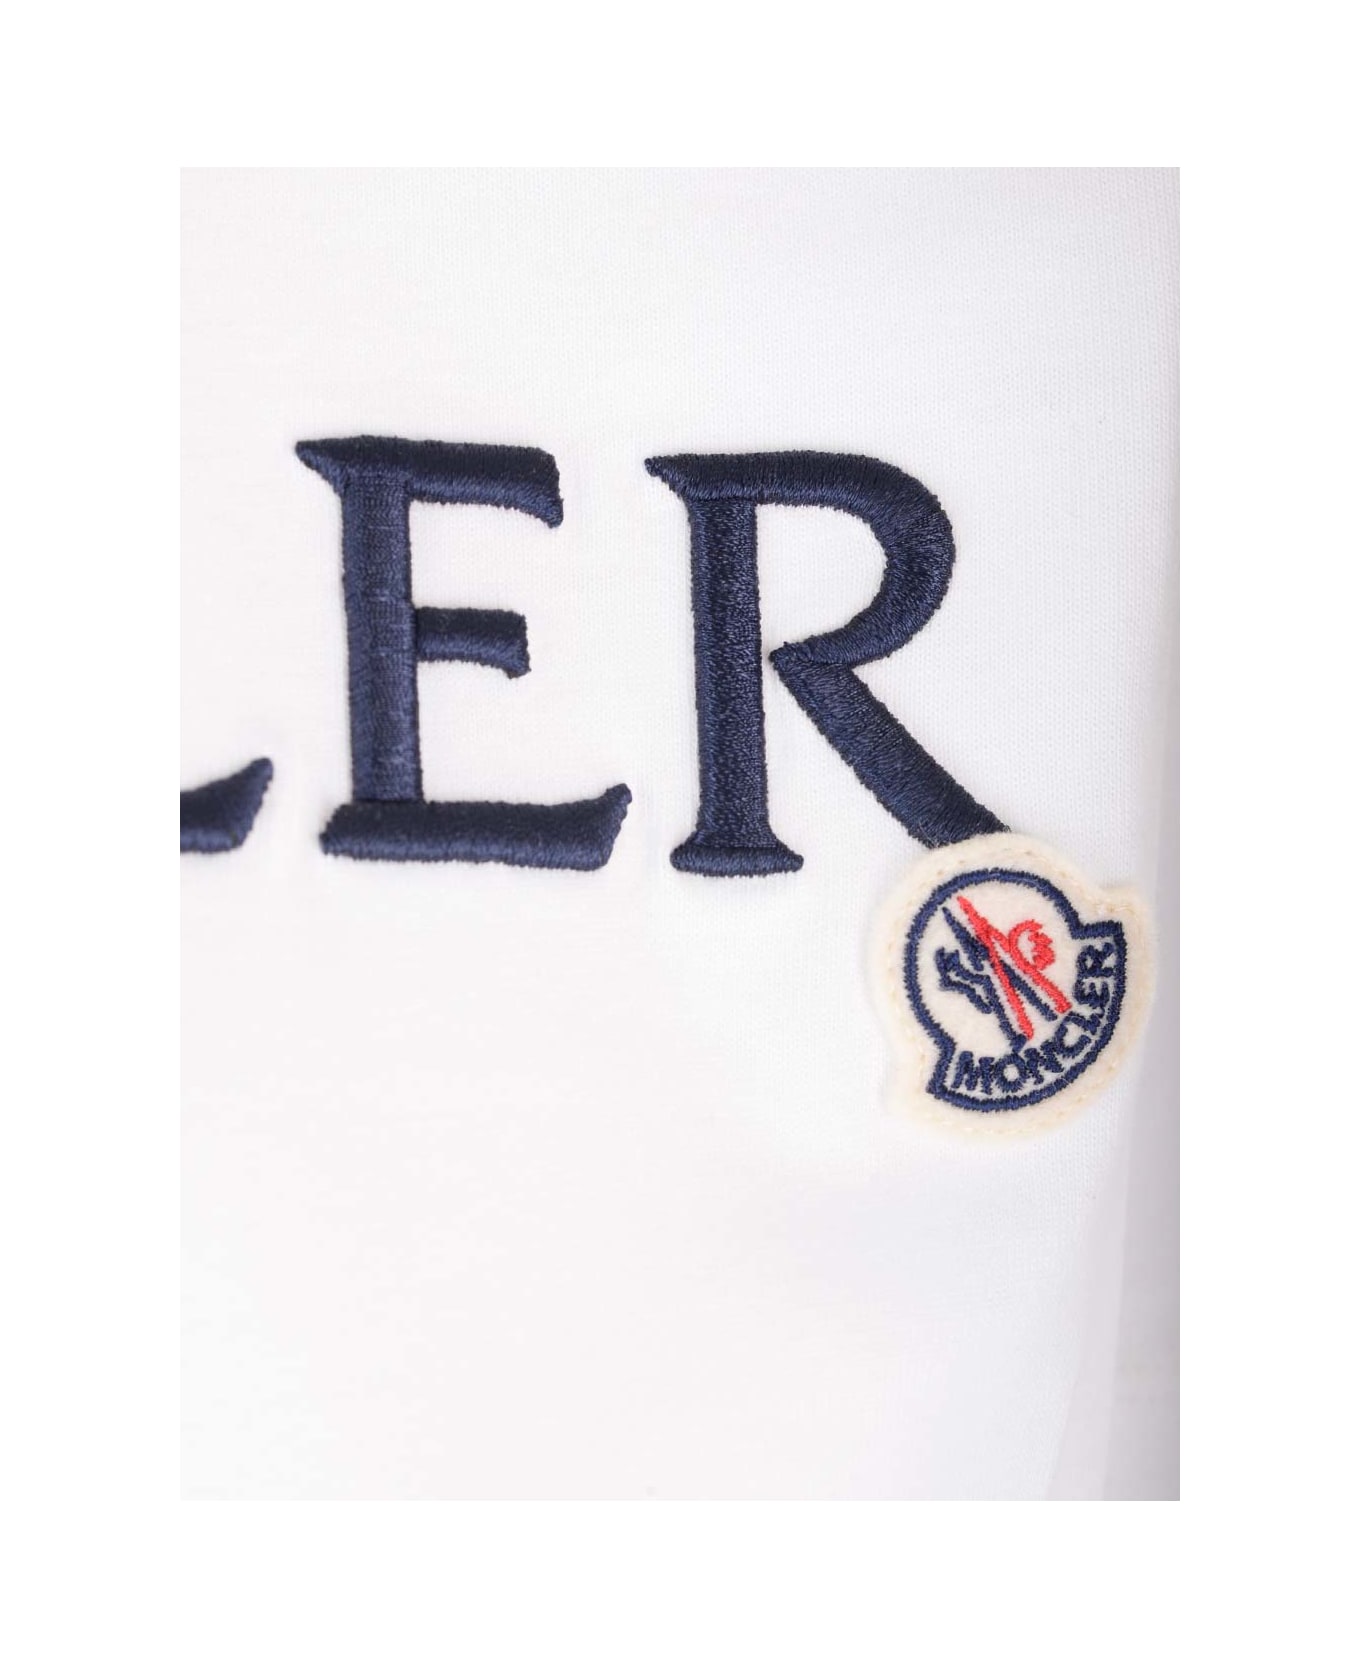 Moncler Embroidered T-shirt - White Tシャツ